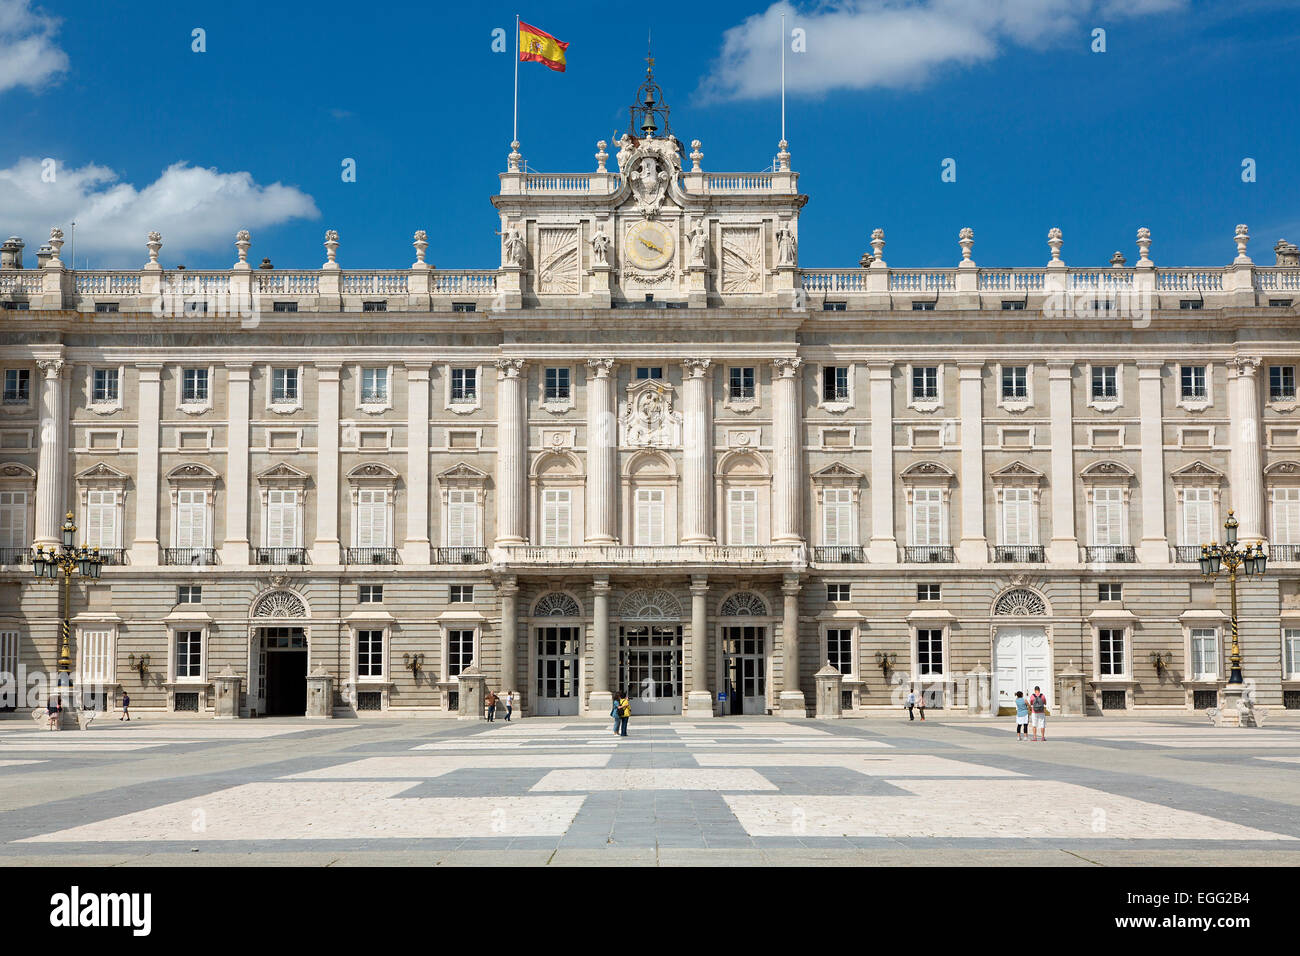 Courtyard in the Palacio Real (Royal Palace) in Madrid Stock Photo